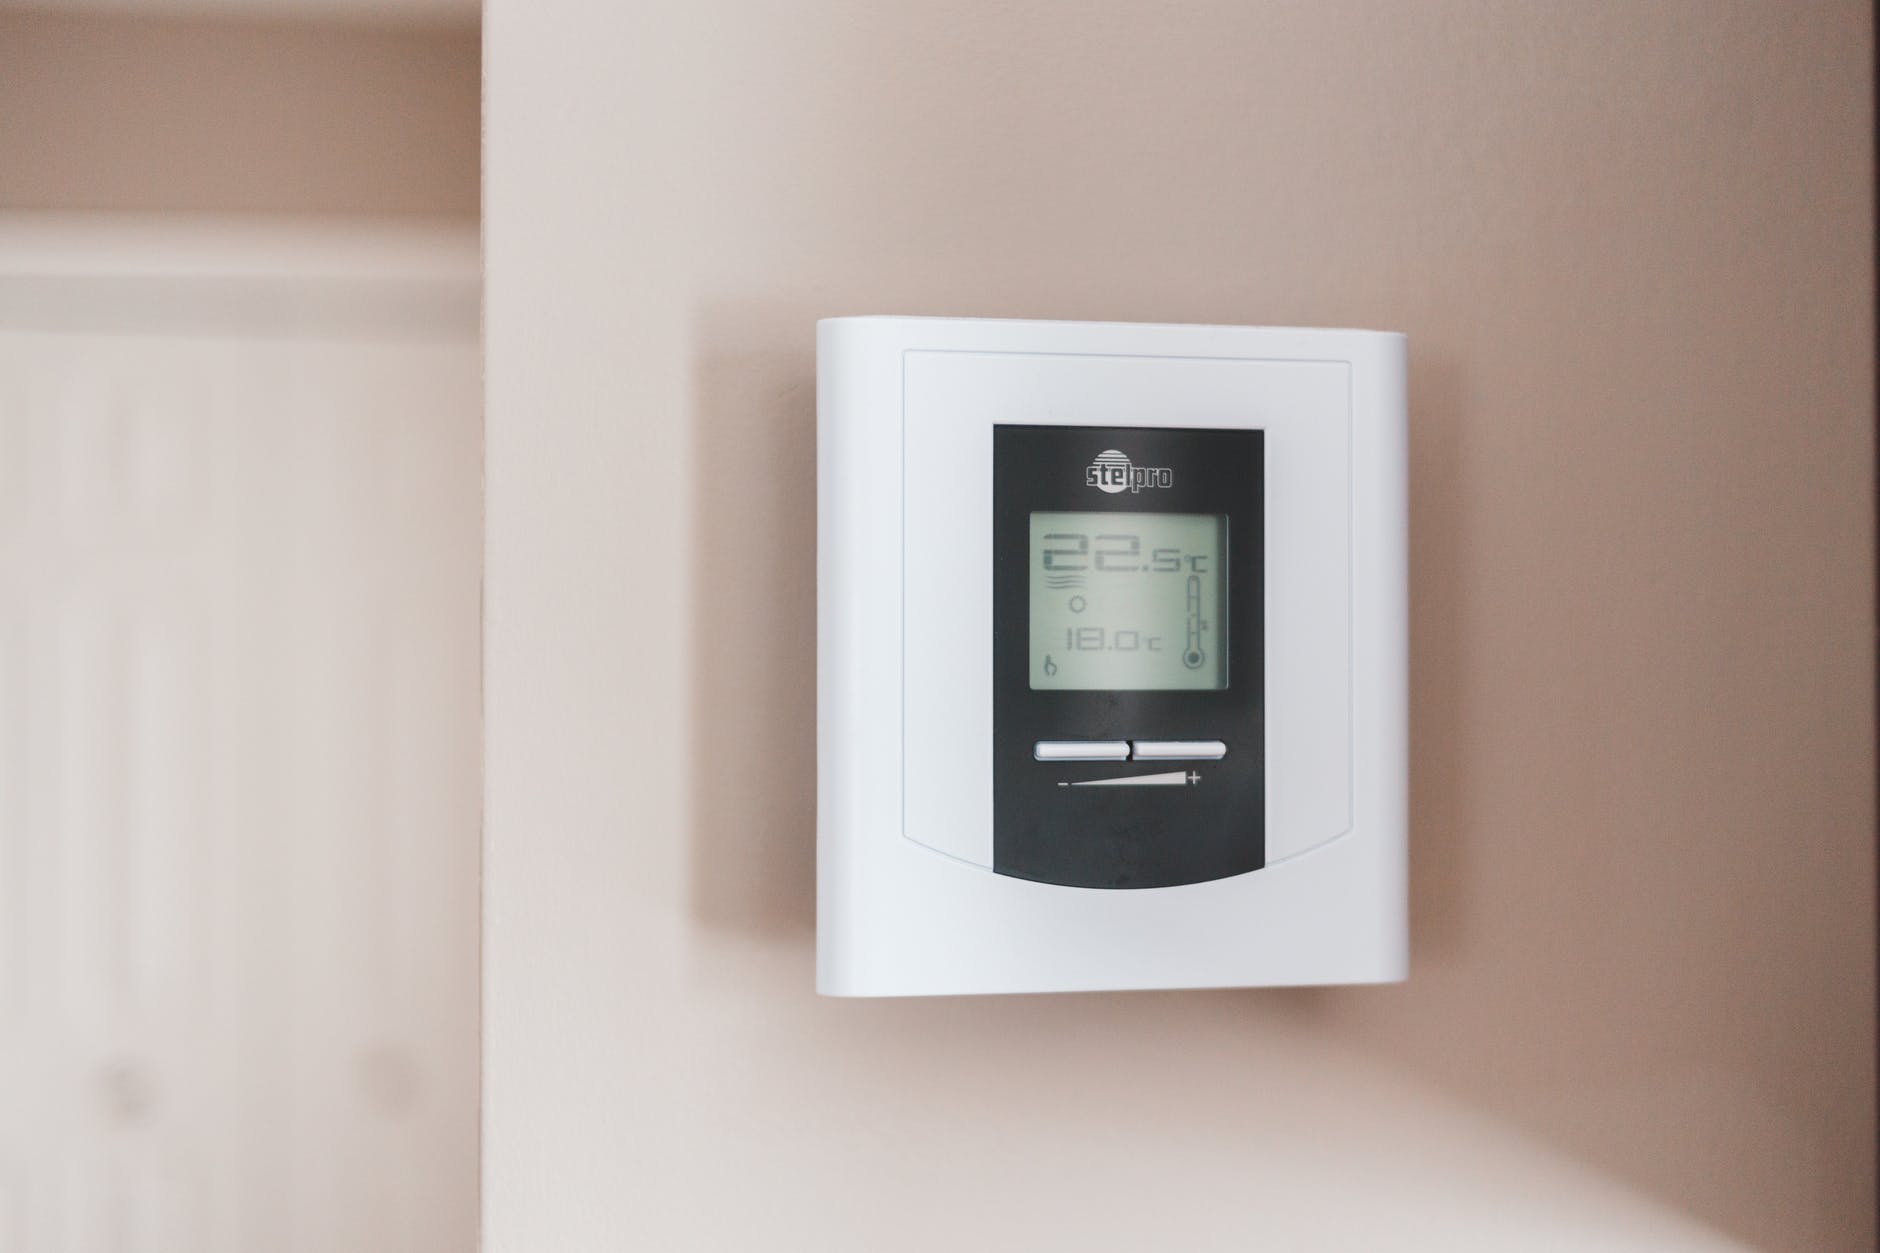 How Does a Programmable Thermostat Work?